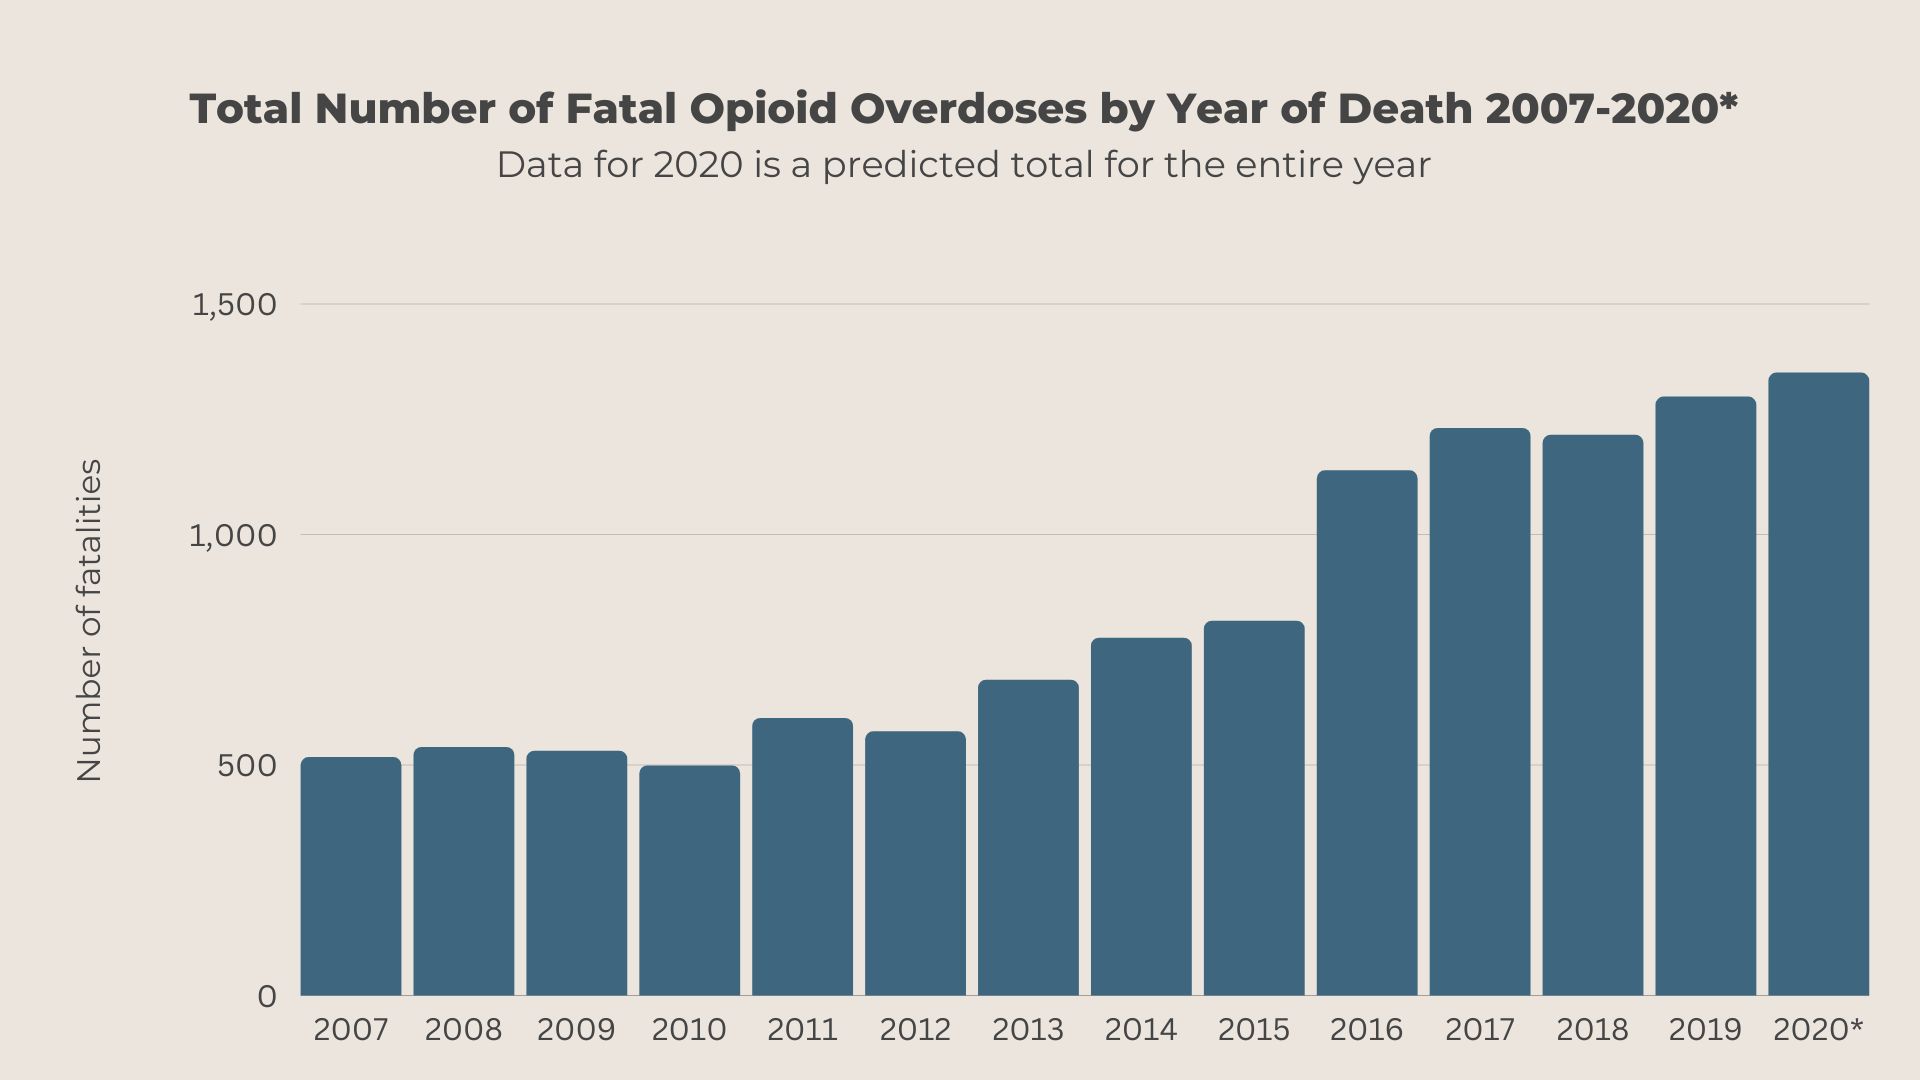 Total Number of Fatal Opioid Overdoses by Year of Death 2007-2020*